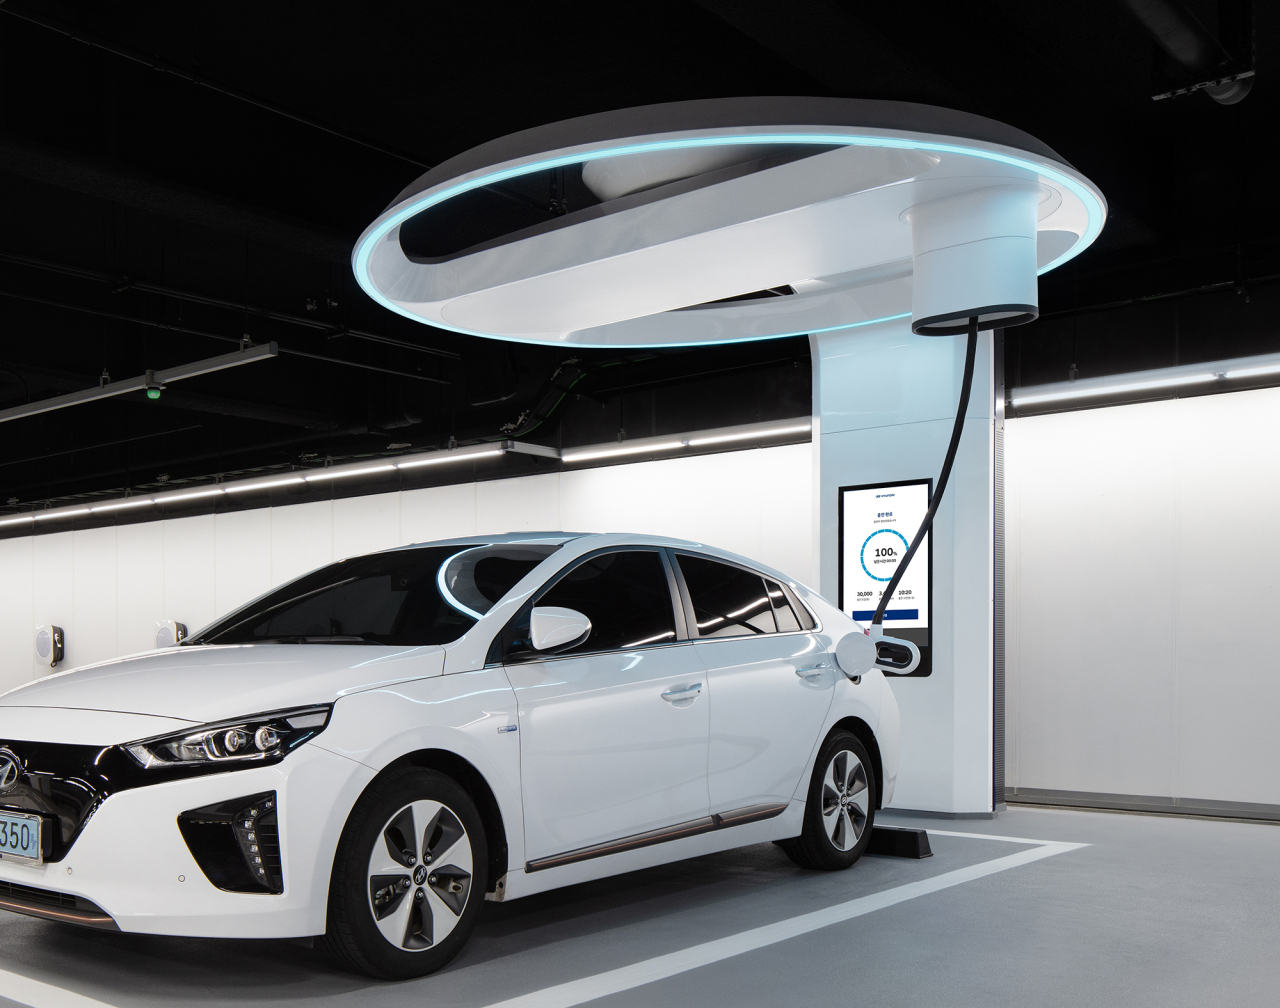 An electric vehicle is connected to Hi-Charger, an exclusive ultrahigh speed charger developed by Hyundai Motor. (Hyundai Motor)